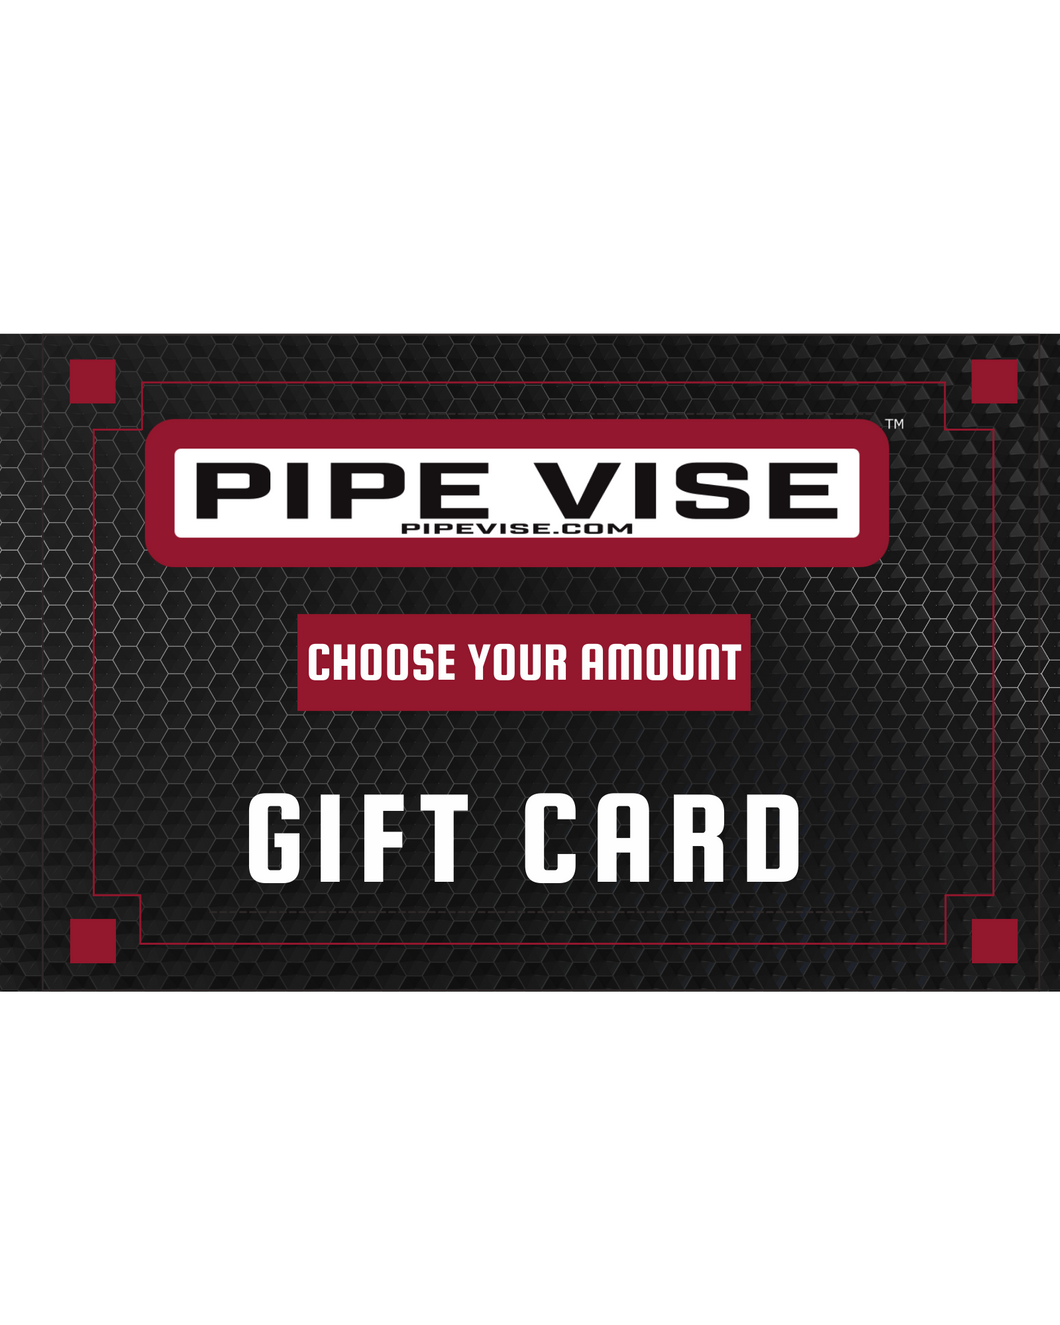 Pipe Vise Gift Card